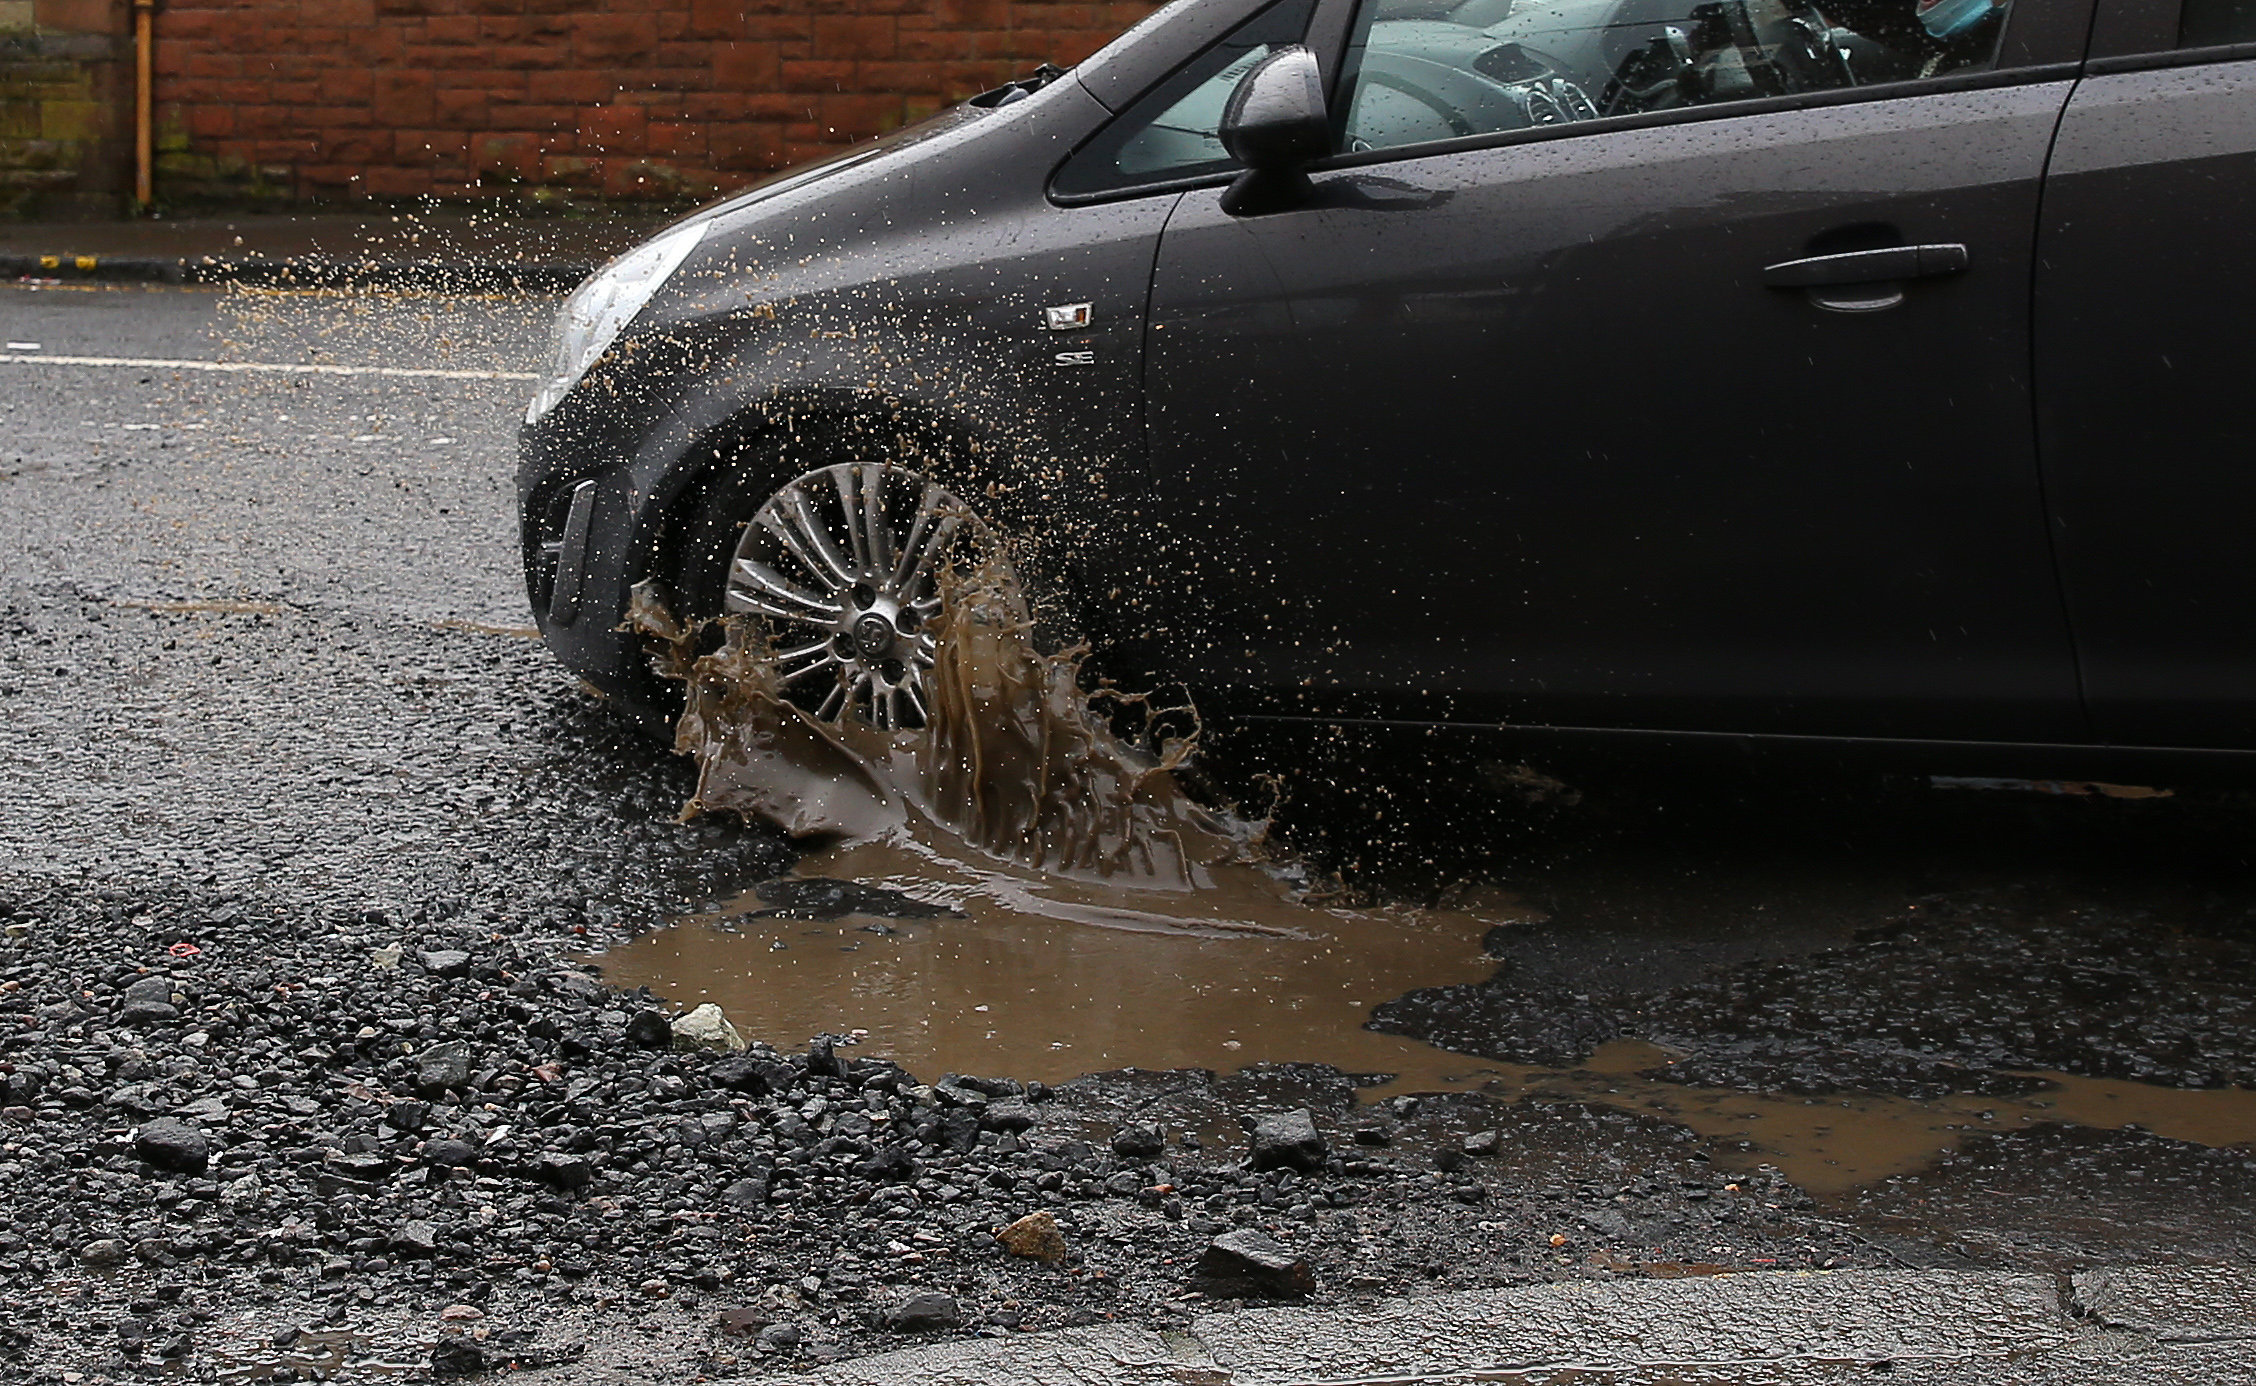 Mounting repair costs for potholes could be avoided